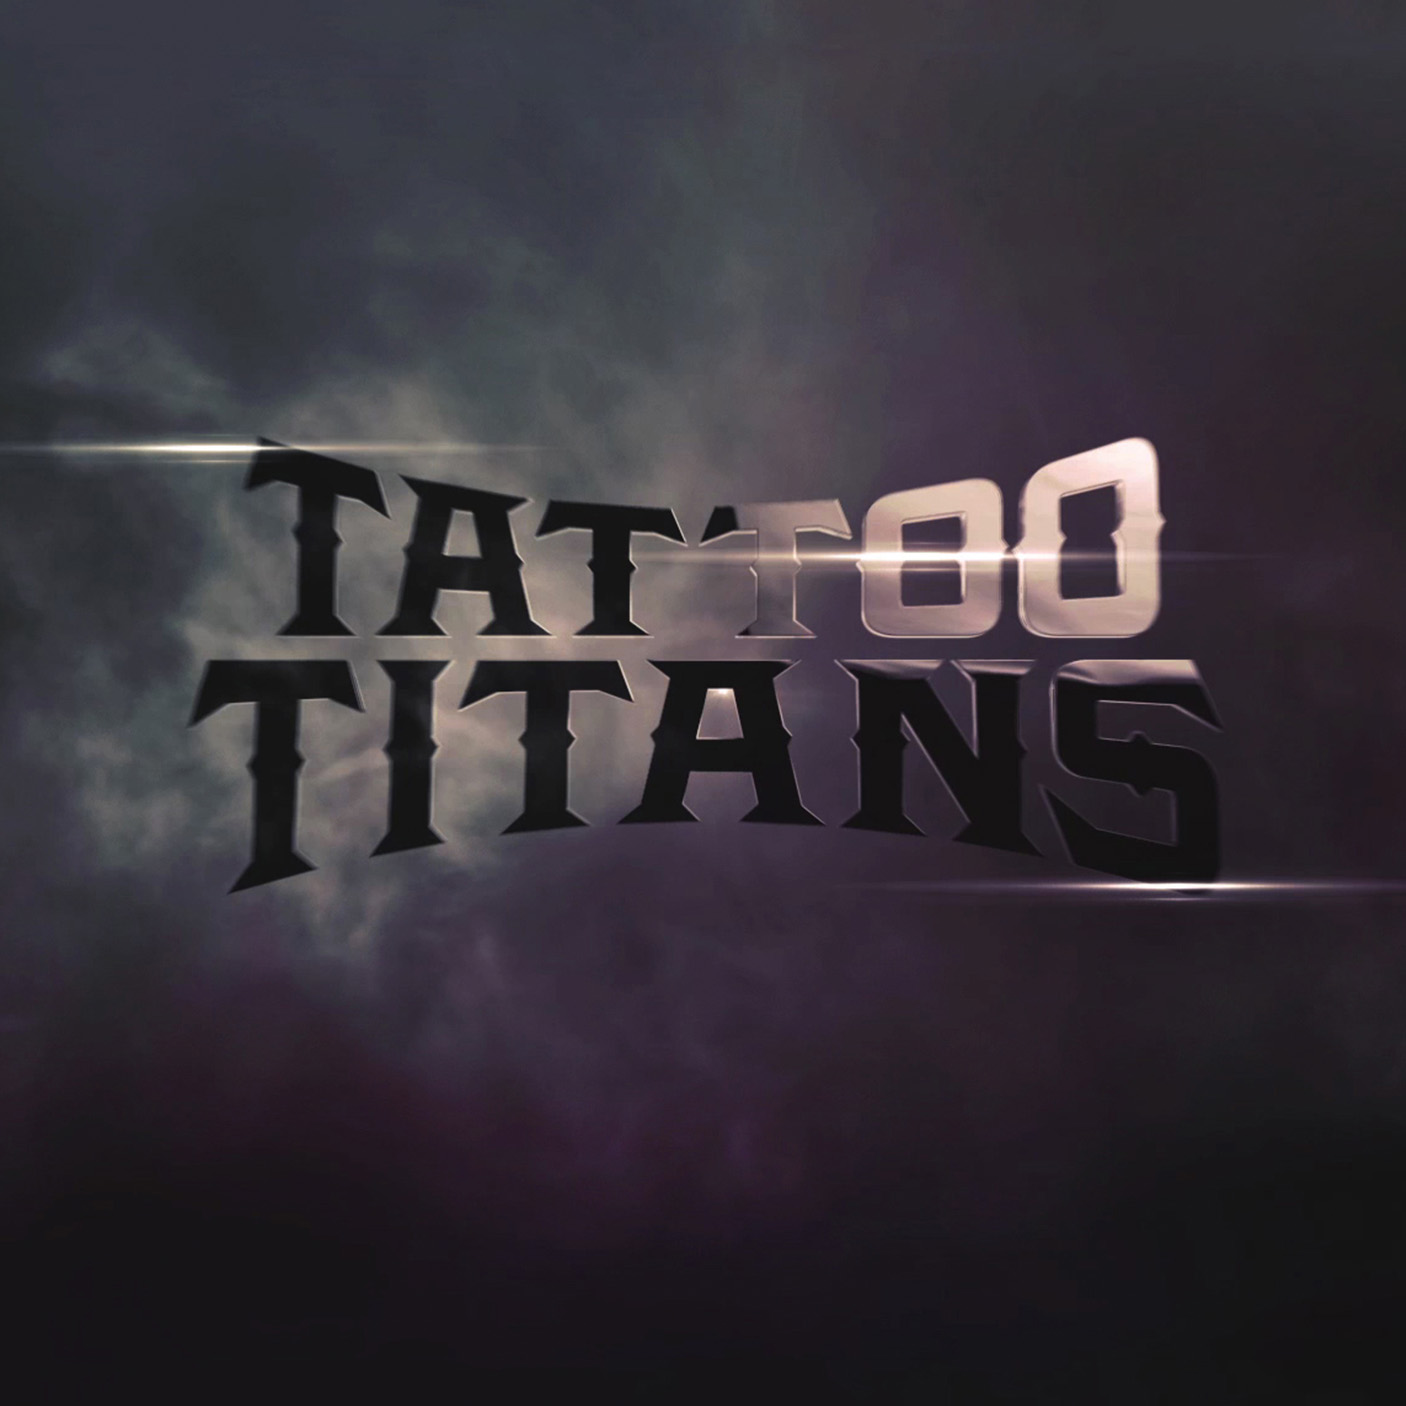 Branding and type treatment for CMT reality television show, Tattoo Titans.